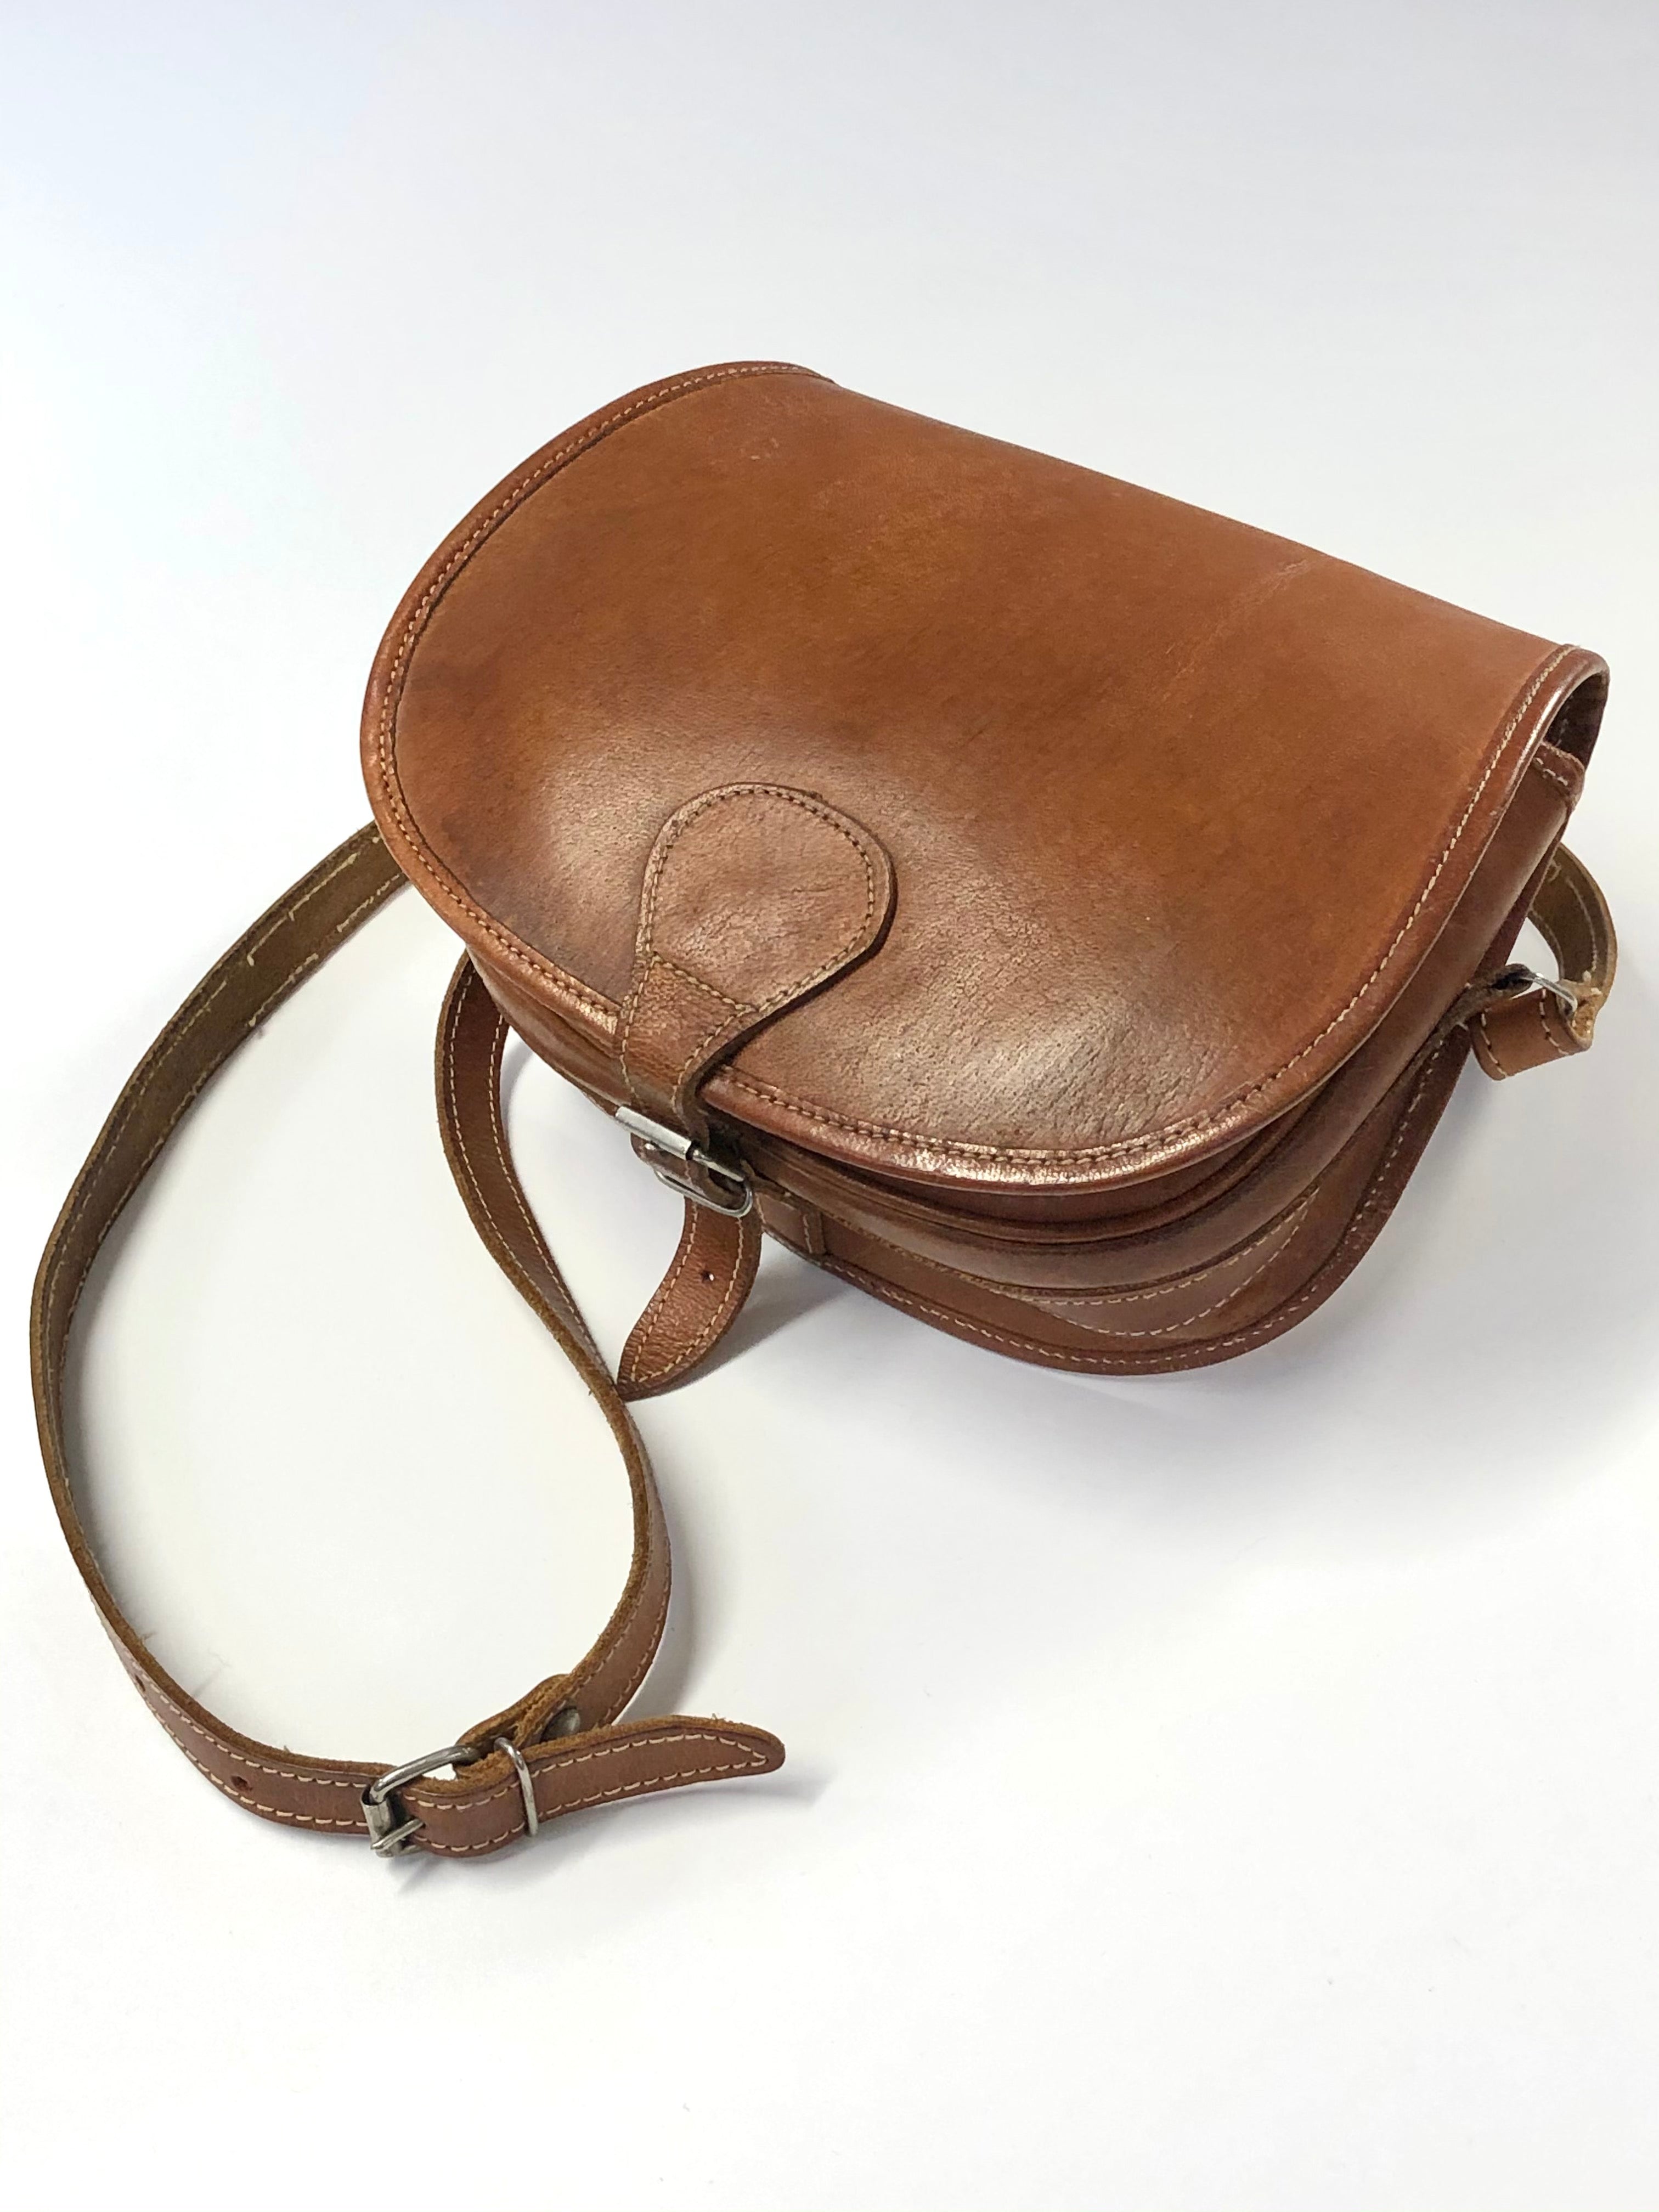 7 Inch Leather Crossbody Bag in VINTAGE TAUPE